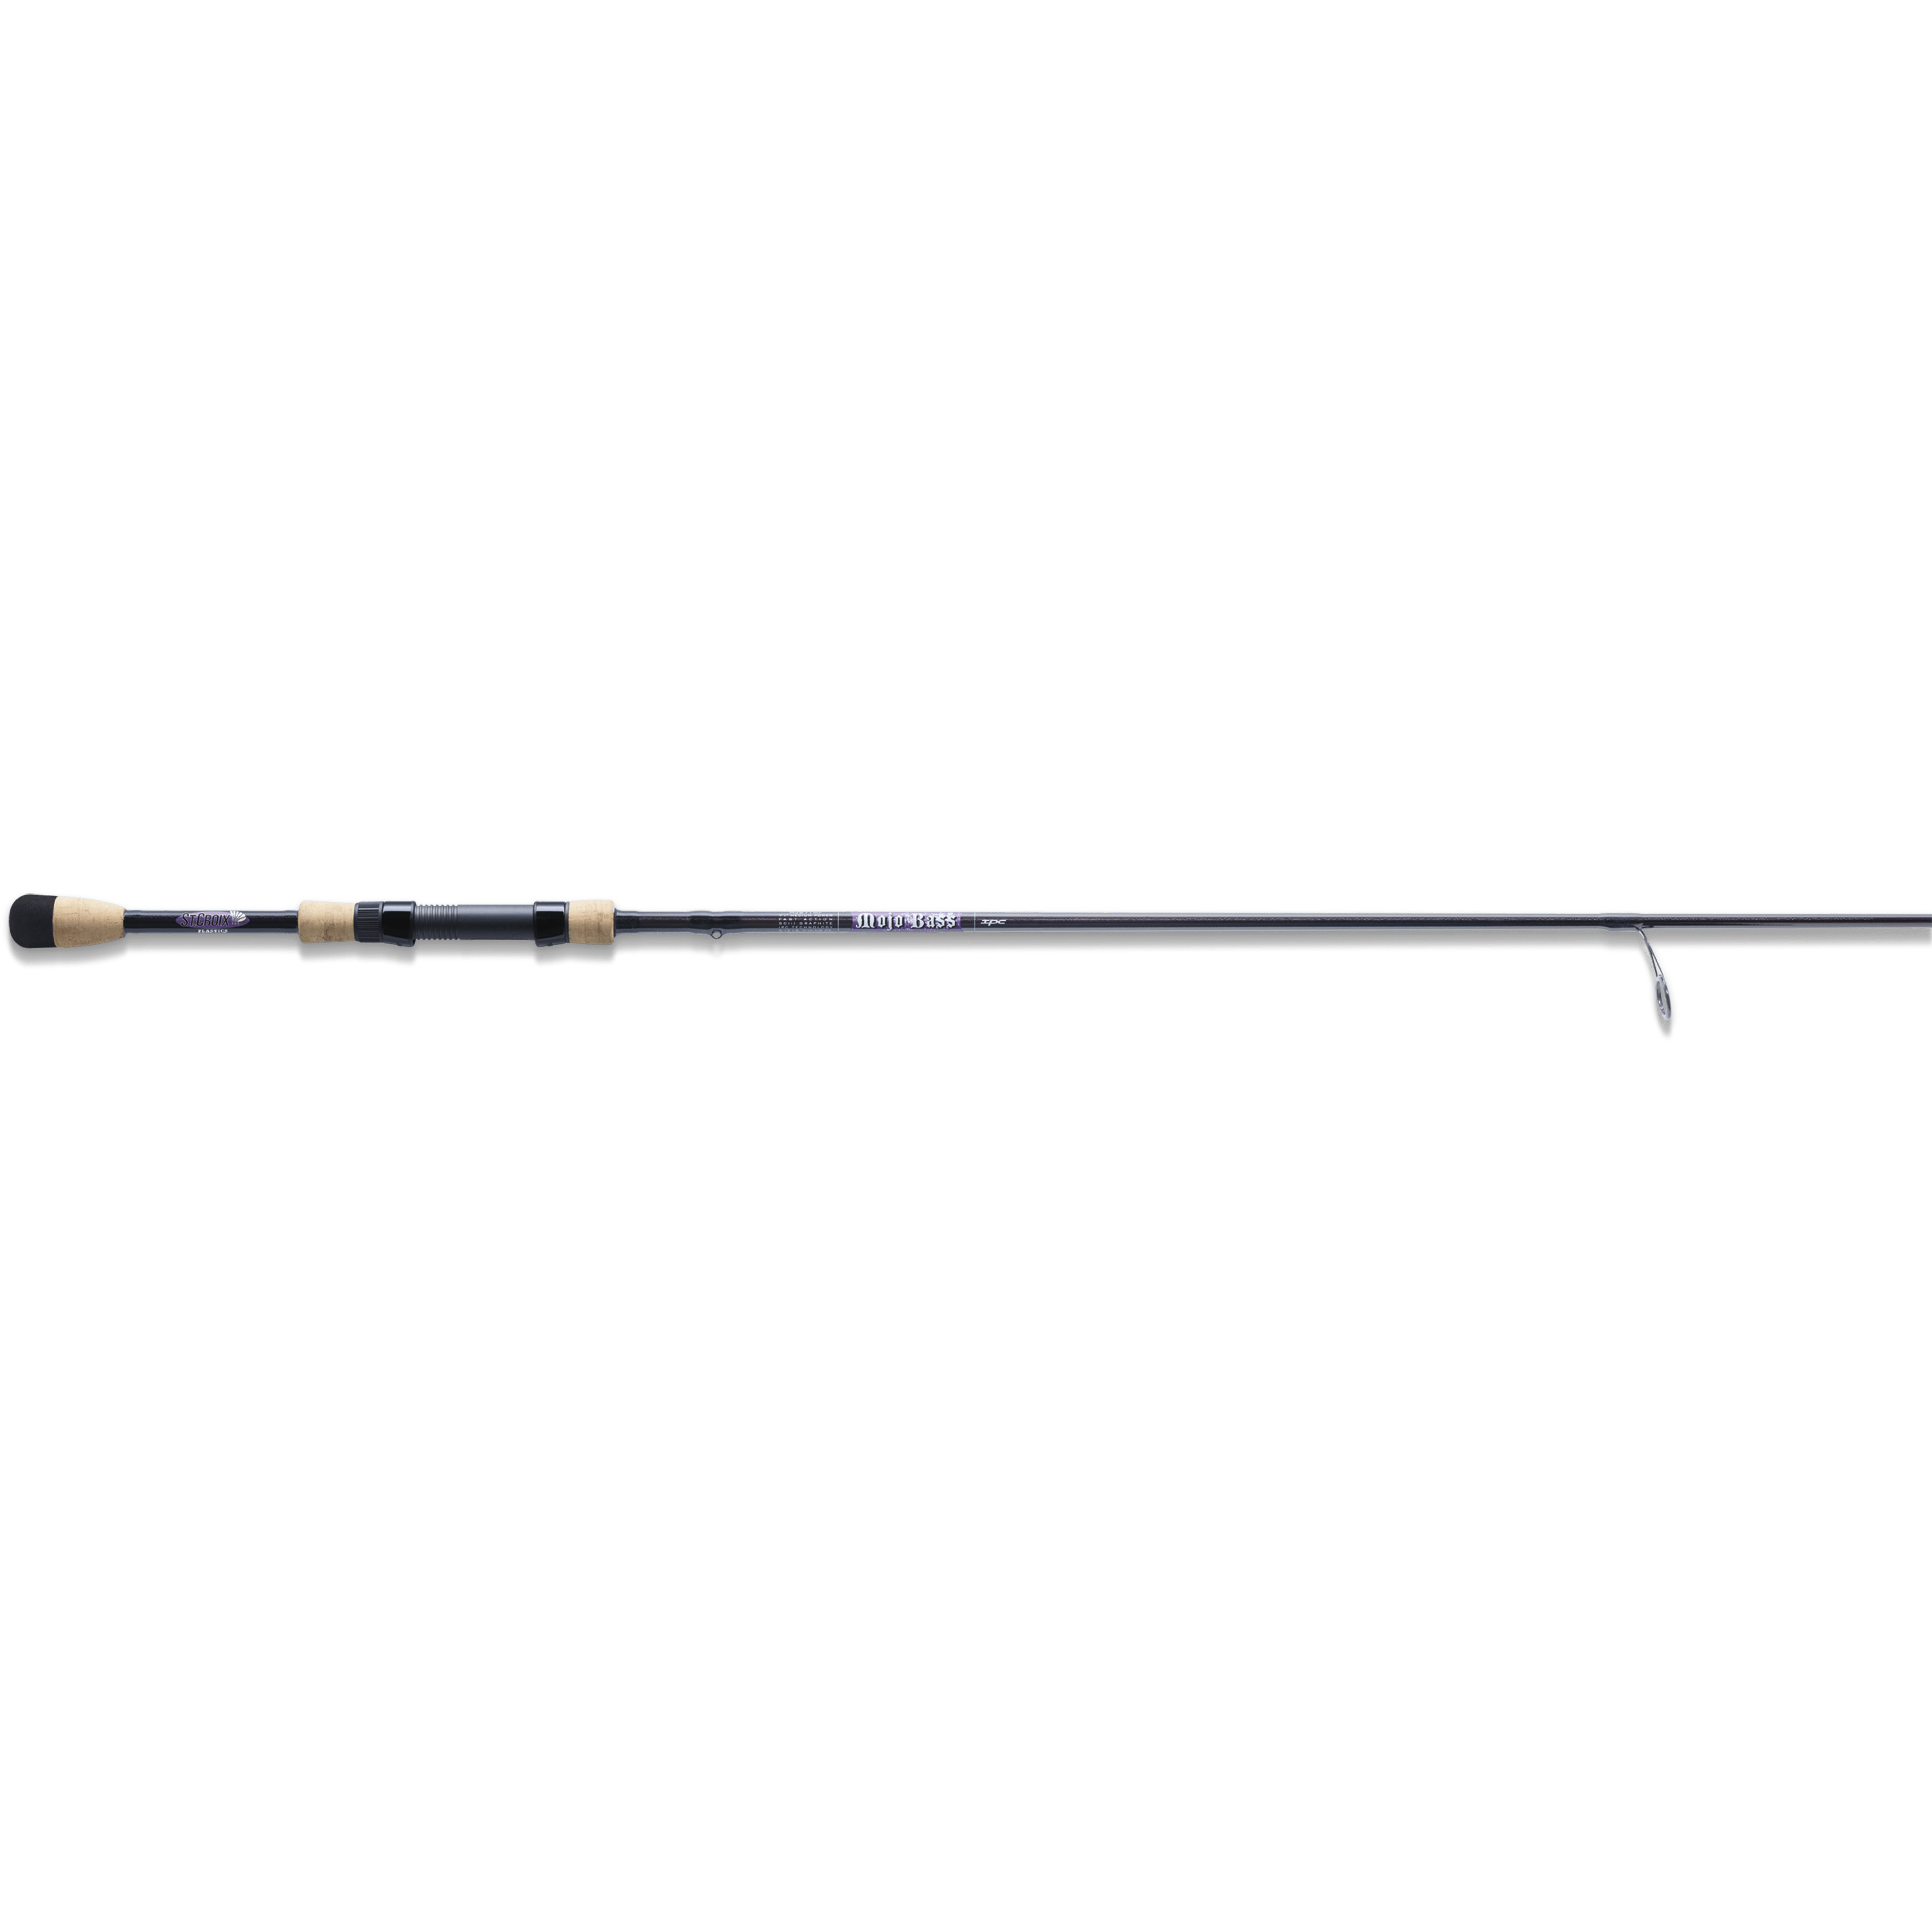 St. Croix Mojo Bass Graphite Spinning Fishing Rod - MJS610MLXF for sale  online